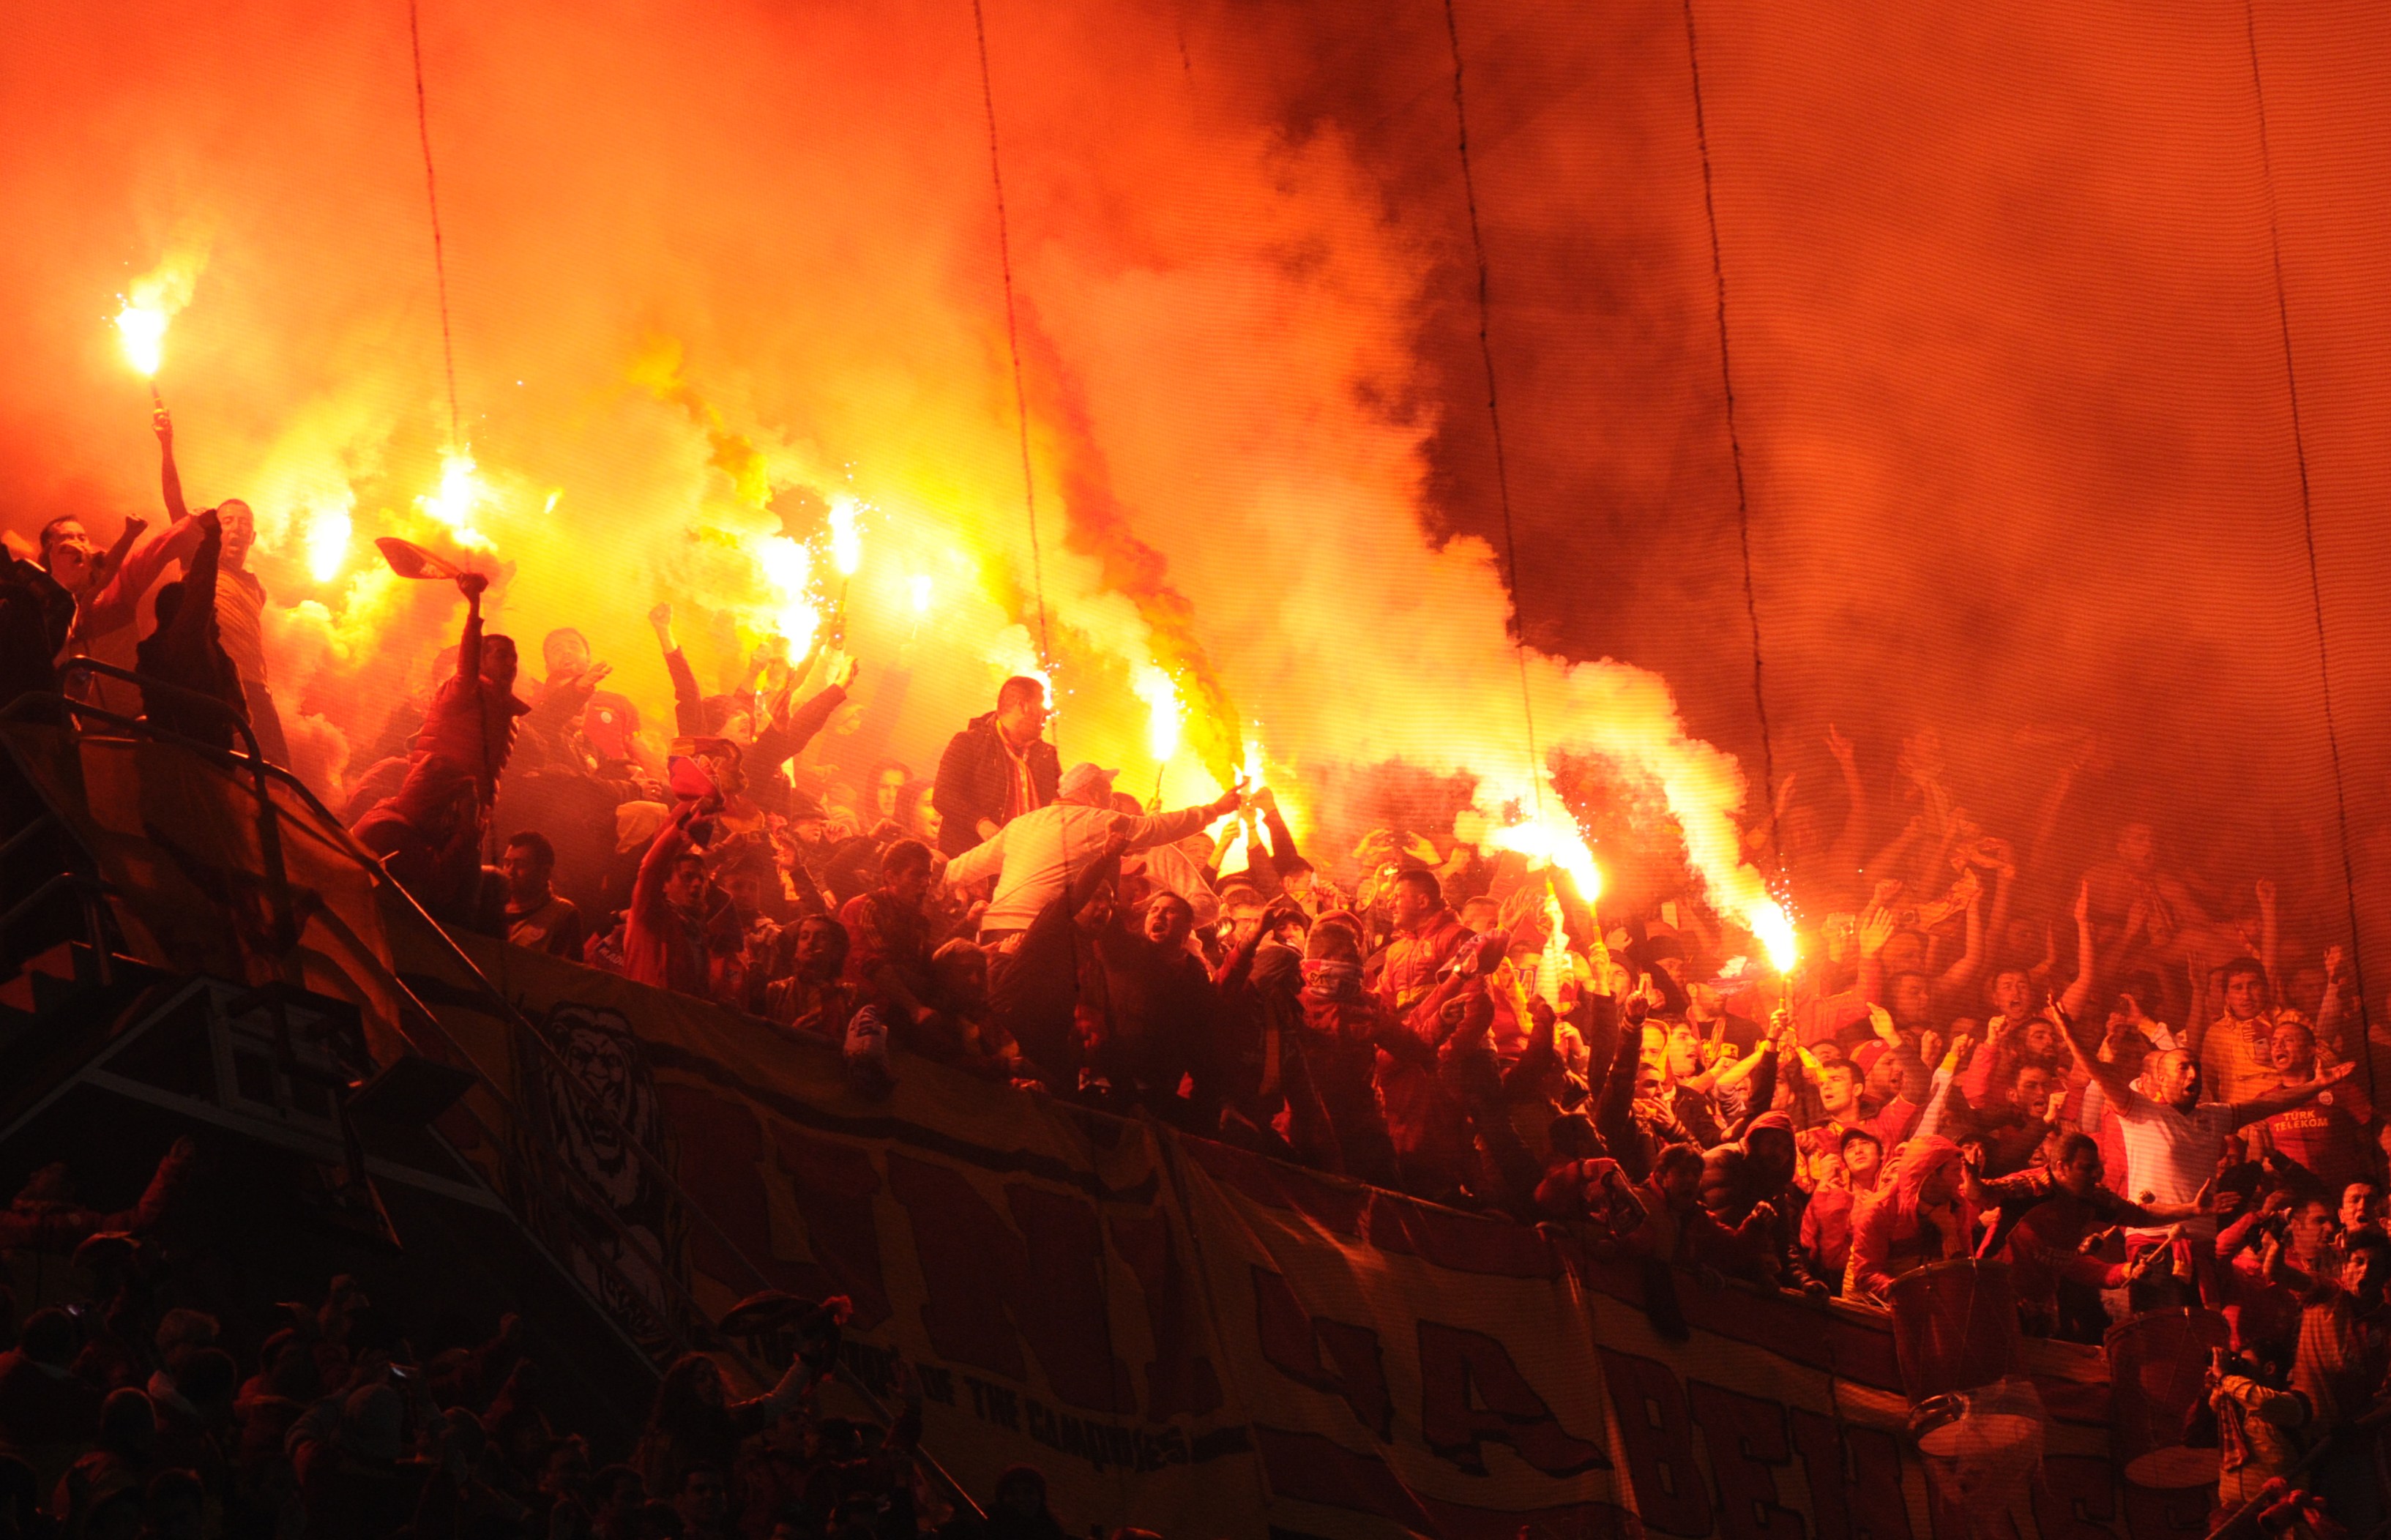 Just as in Germany, pyrotechnics are forbidden in Turkey, but common in all stadia and hardly punished.